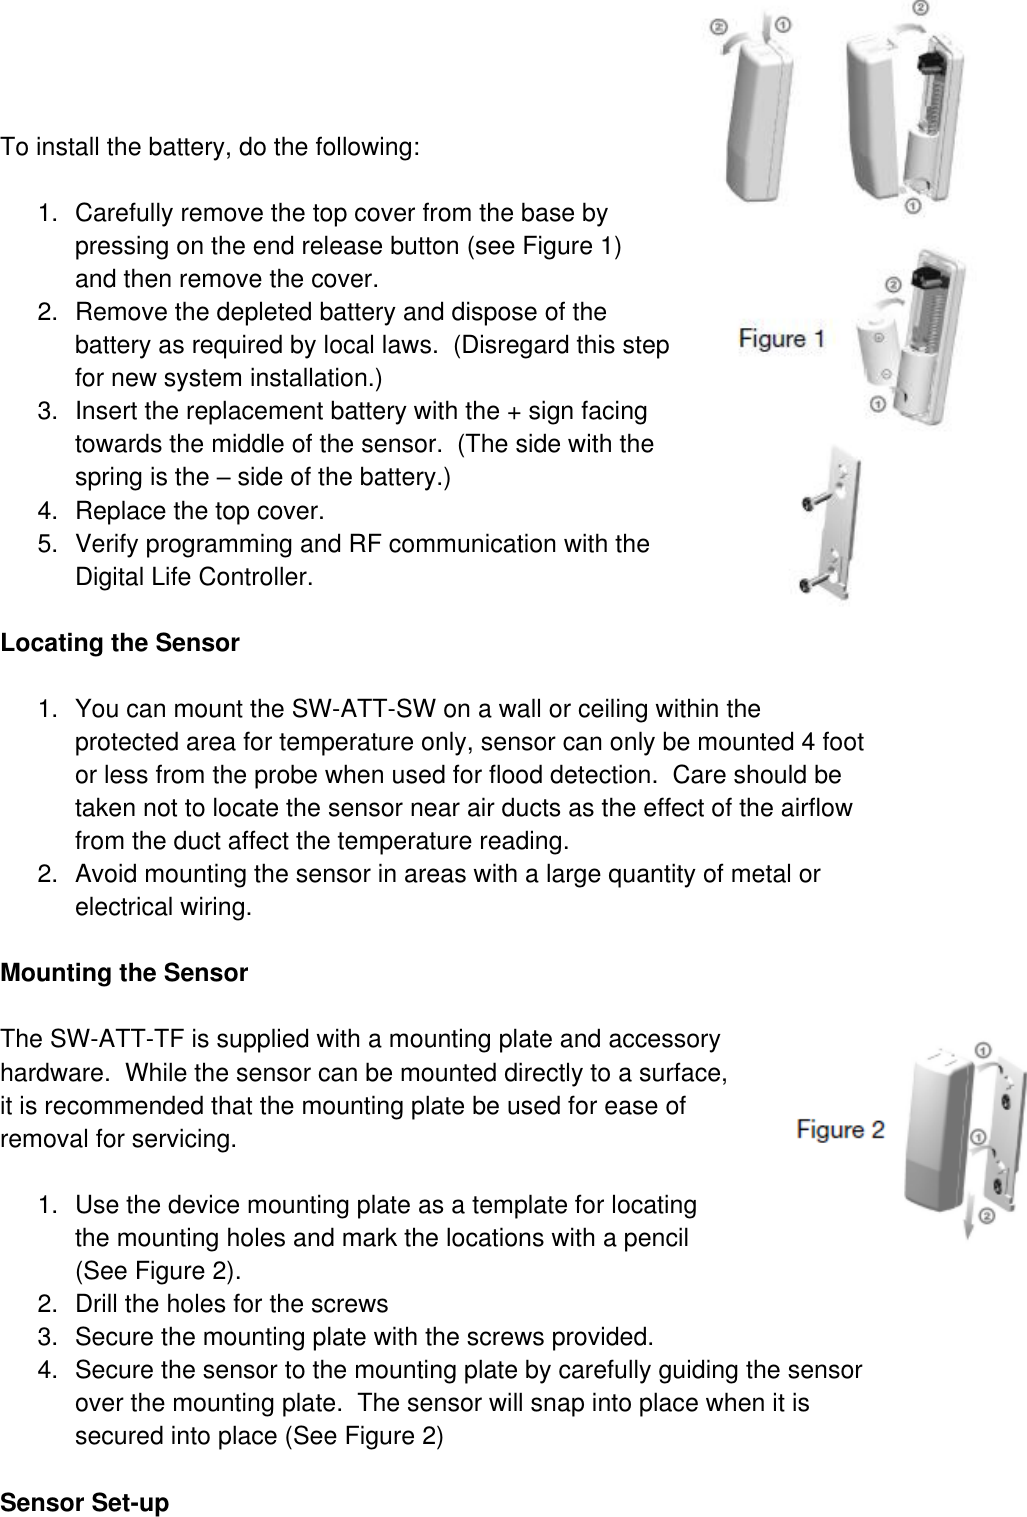  To install the battery, do the following:  1.  Carefully remove the top cover from the base by pressing on the end release button (see Figure 1) and then remove the cover.  2.  Remove the depleted battery and dispose of the battery as required by local laws.  (Disregard this step for new system installation.) 3.  Insert the replacement battery with the + sign facing towards the middle of the sensor.  (The side with the spring is the – side of the battery.) 4.  Replace the top cover. 5.  Verify programming and RF communication with the Digital Life Controller.  Locating the Sensor  1.  You can mount the SW-ATT-SW on a wall or ceiling within the protected area for temperature only, sensor can only be mounted 4 foot or less from the probe when used for flood detection.  Care should be taken not to locate the sensor near air ducts as the effect of the airflow from the duct affect the temperature reading.   2.  Avoid mounting the sensor in areas with a large quantity of metal or electrical wiring.  Mounting the Sensor  The SW-ATT-TF is supplied with a mounting plate and accessory hardware.  While the sensor can be mounted directly to a surface, it is recommended that the mounting plate be used for ease of removal for servicing.  1.  Use the device mounting plate as a template for locating the mounting holes and mark the locations with a pencil (See Figure 2).  2.  Drill the holes for the screws 3.  Secure the mounting plate with the screws provided. 4.  Secure the sensor to the mounting plate by carefully guiding the sensor over the mounting plate.  The sensor will snap into place when it is secured into place (See Figure 2)  Sensor Set-up 